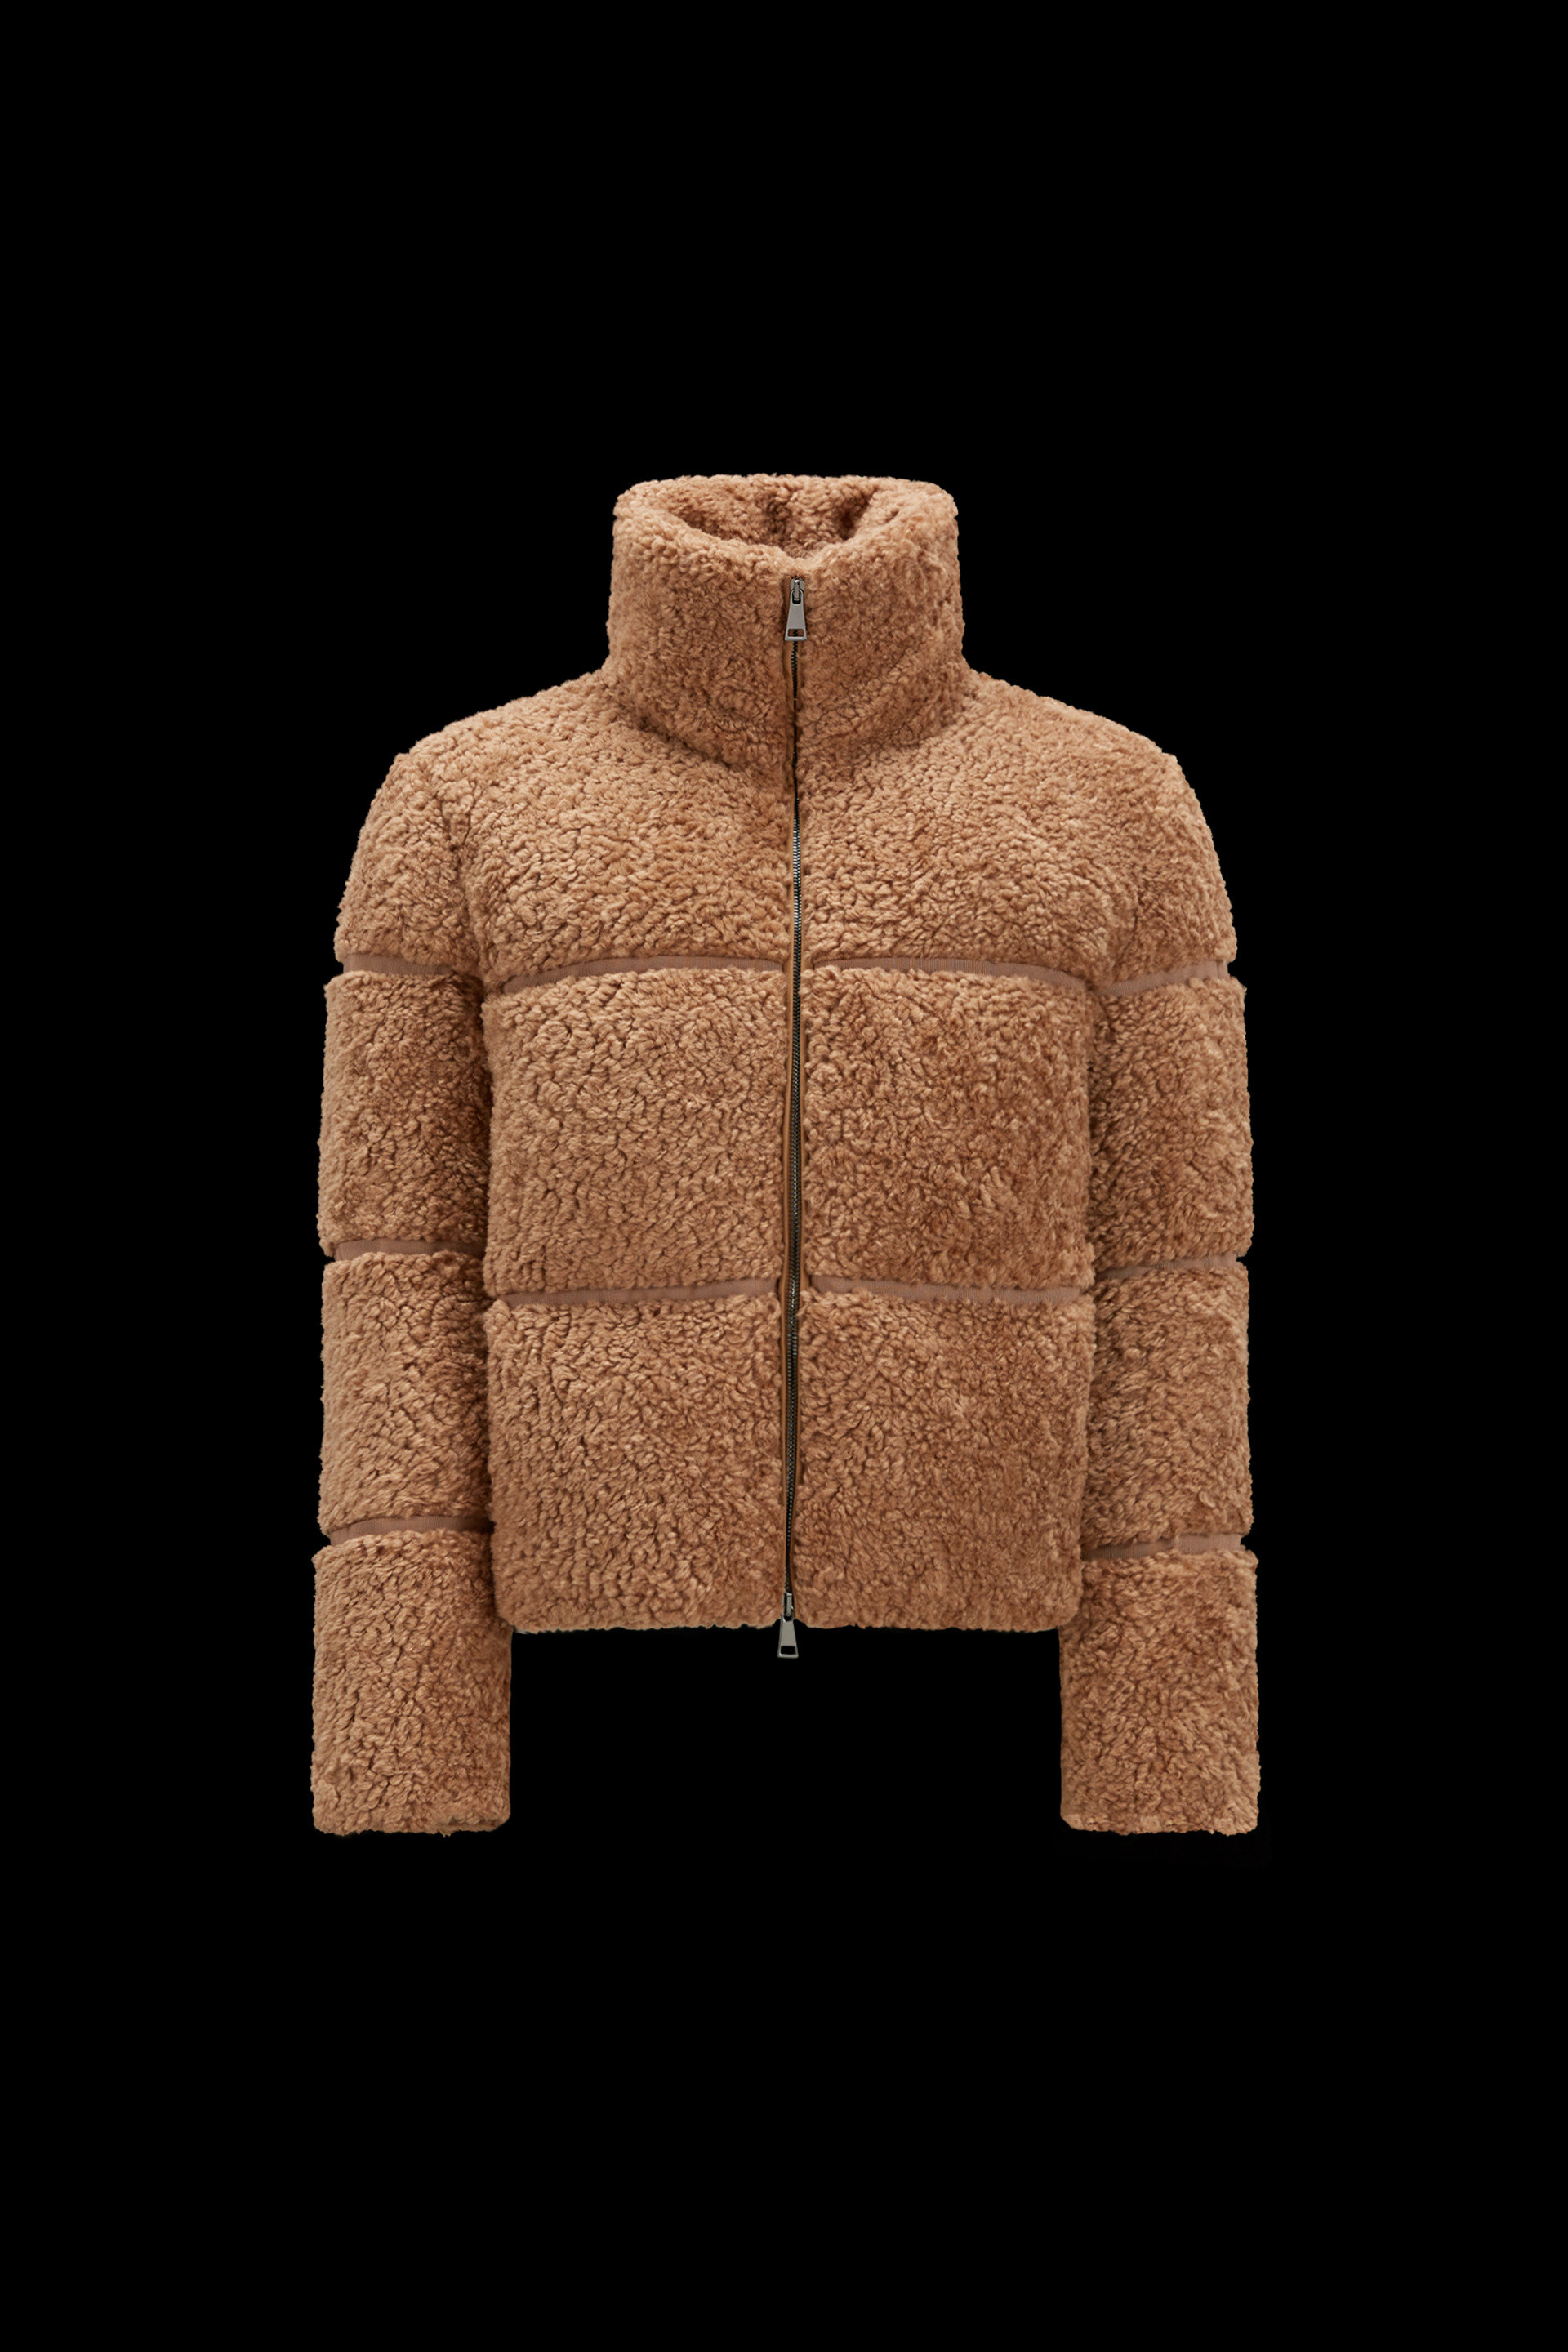 Moncler - Guery Short Down Jacket in Sand Beige